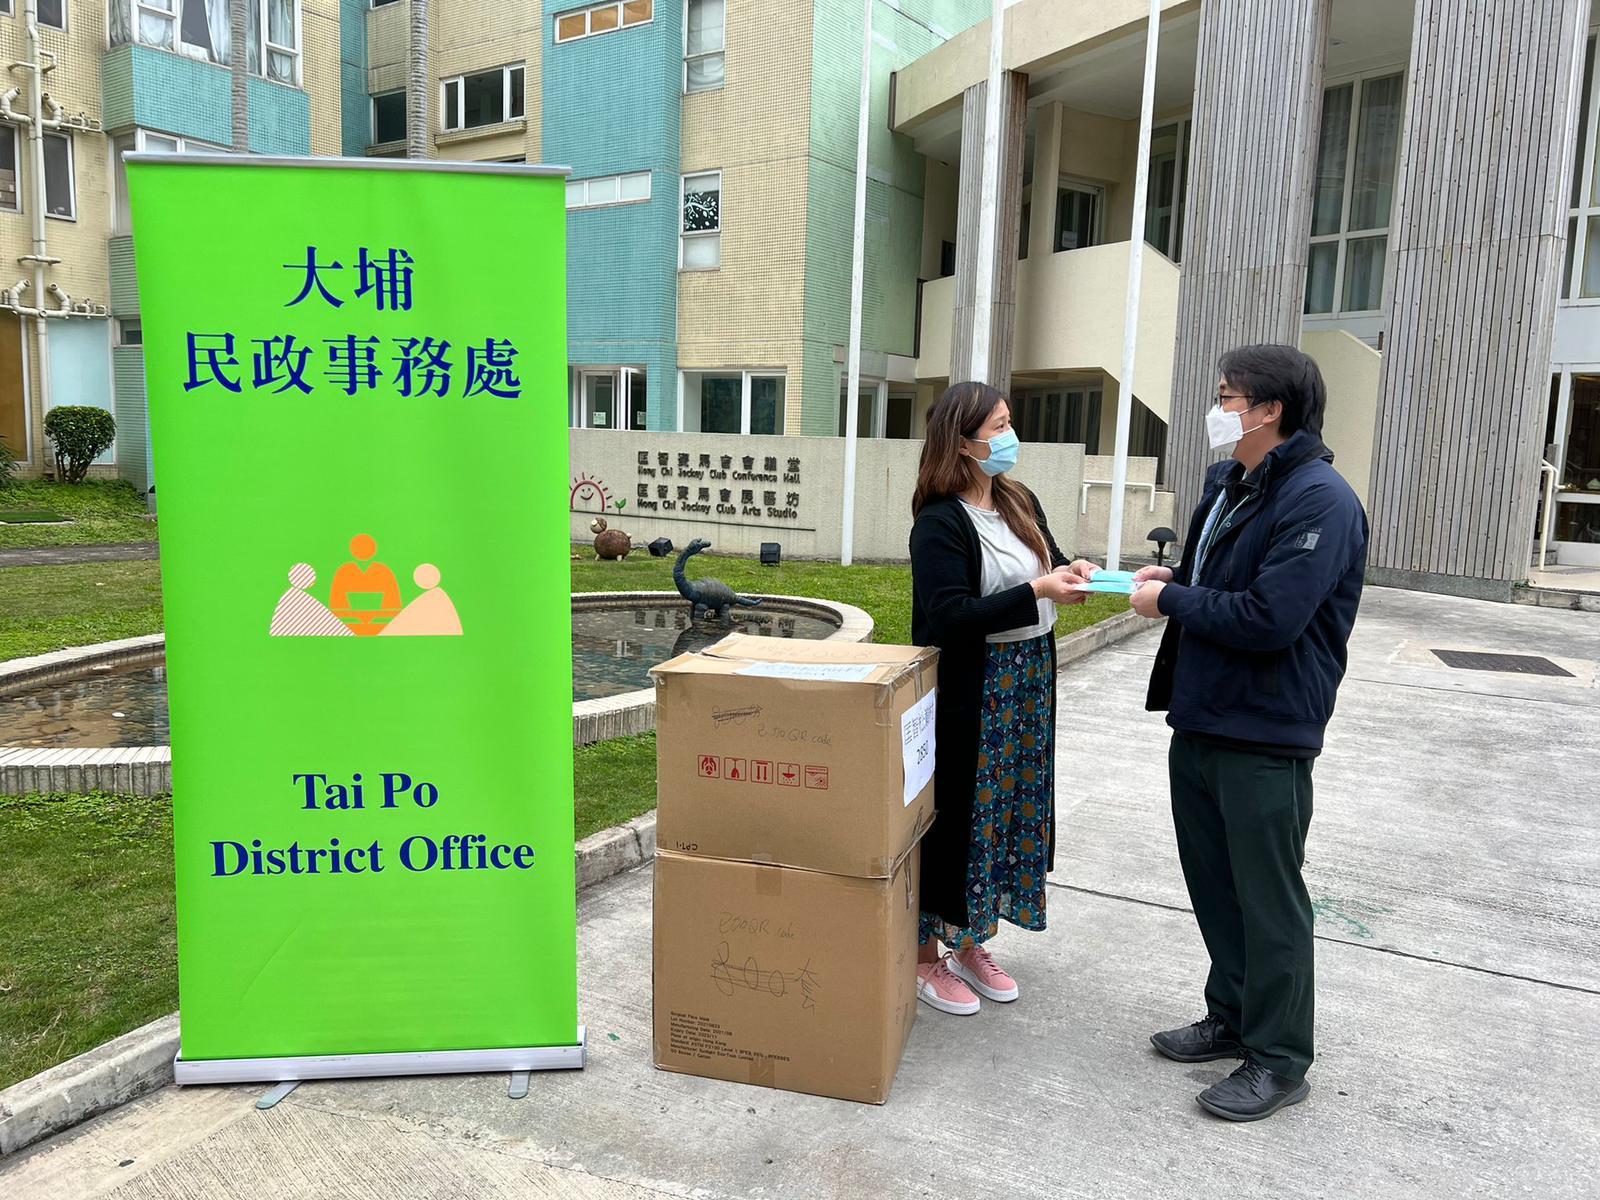 The Tai Po District Office today (February 9) distributed COVID-19 rapid test kits to residents, cleansing workers and property management staff in Hong Chi Pinehill Village for voluntary testing.